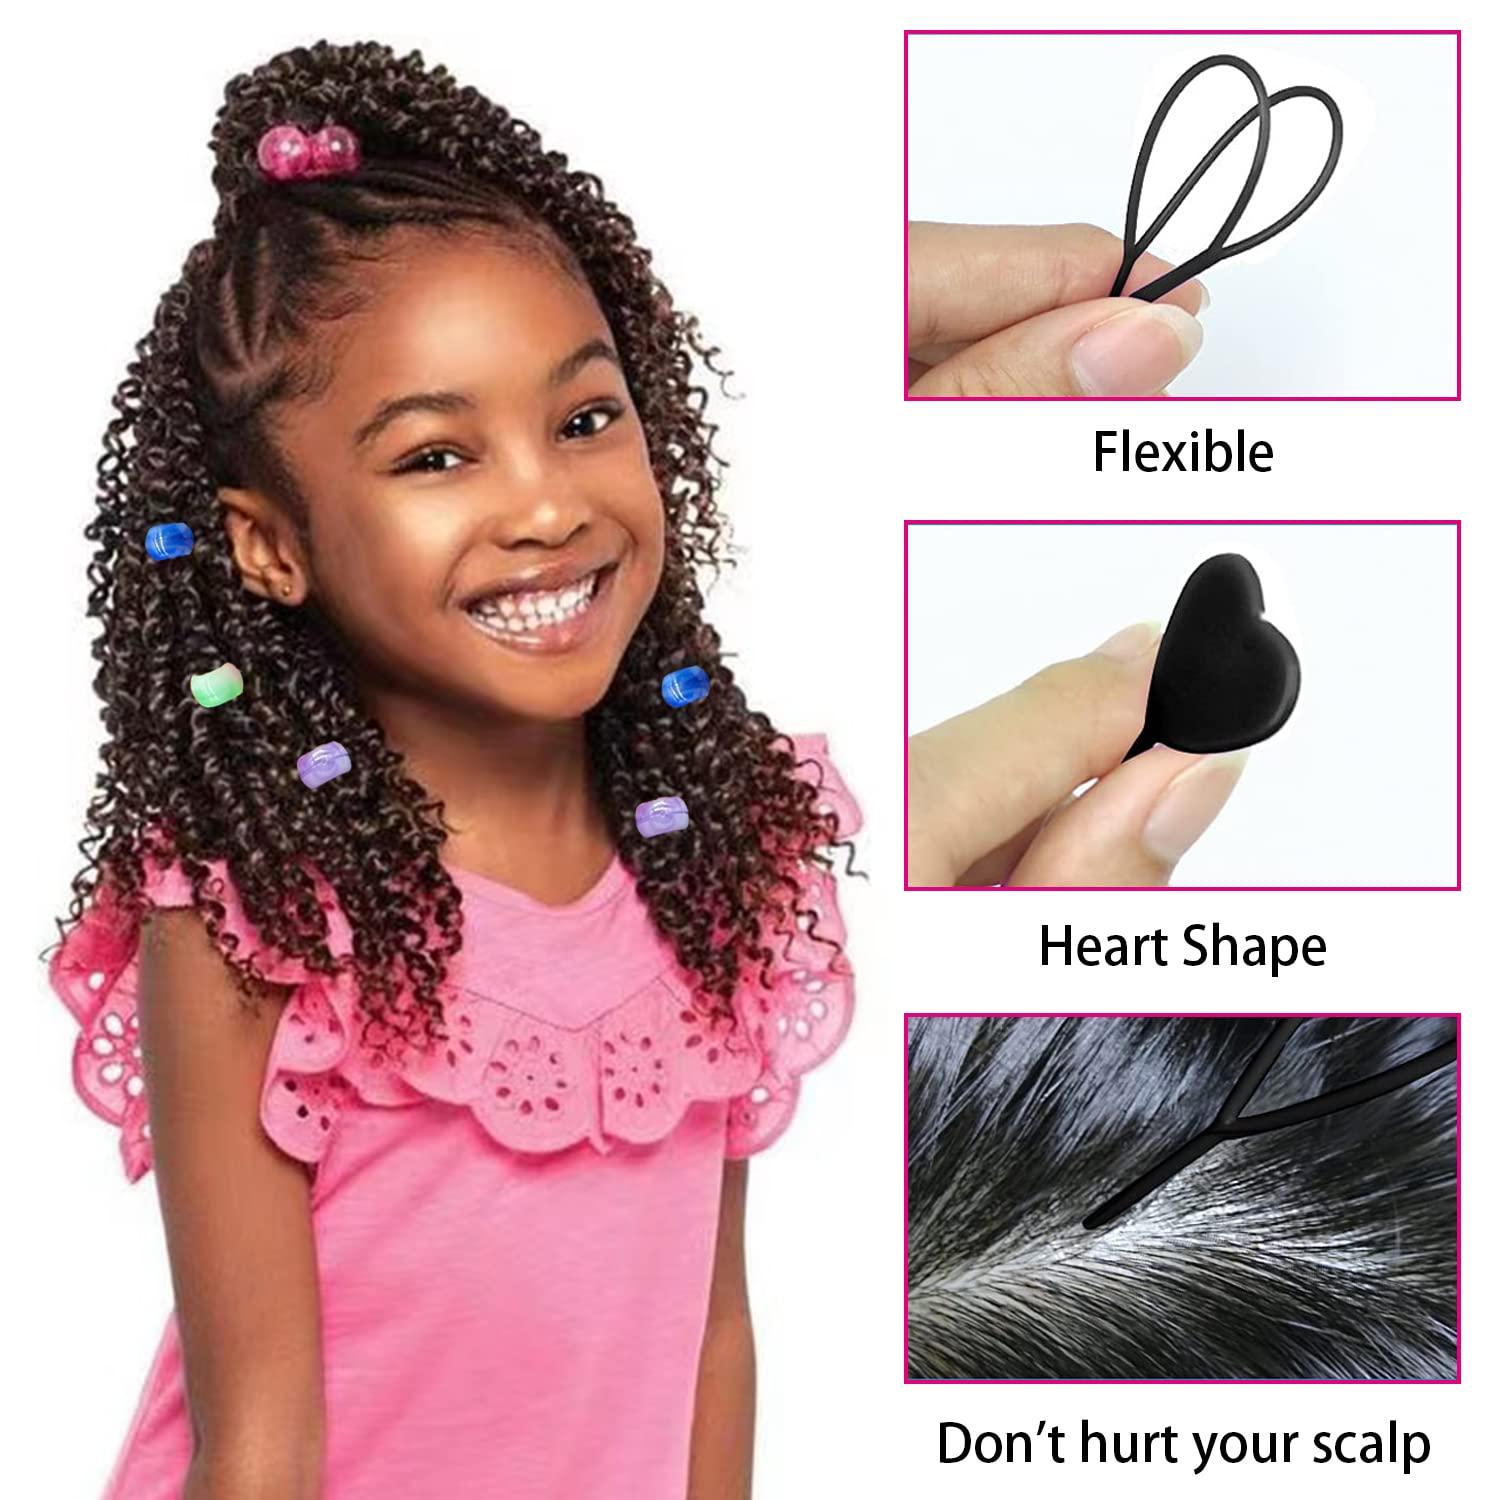  406Pcs Hair Beads Set for Braids for Girls Including 200pcs Hair  Beads for Kids Hair Braids,200pcs Elastic Rubber Bands,5pcs Quick Beader  for Hair Braids and 1Pc Rat Tail Comb 